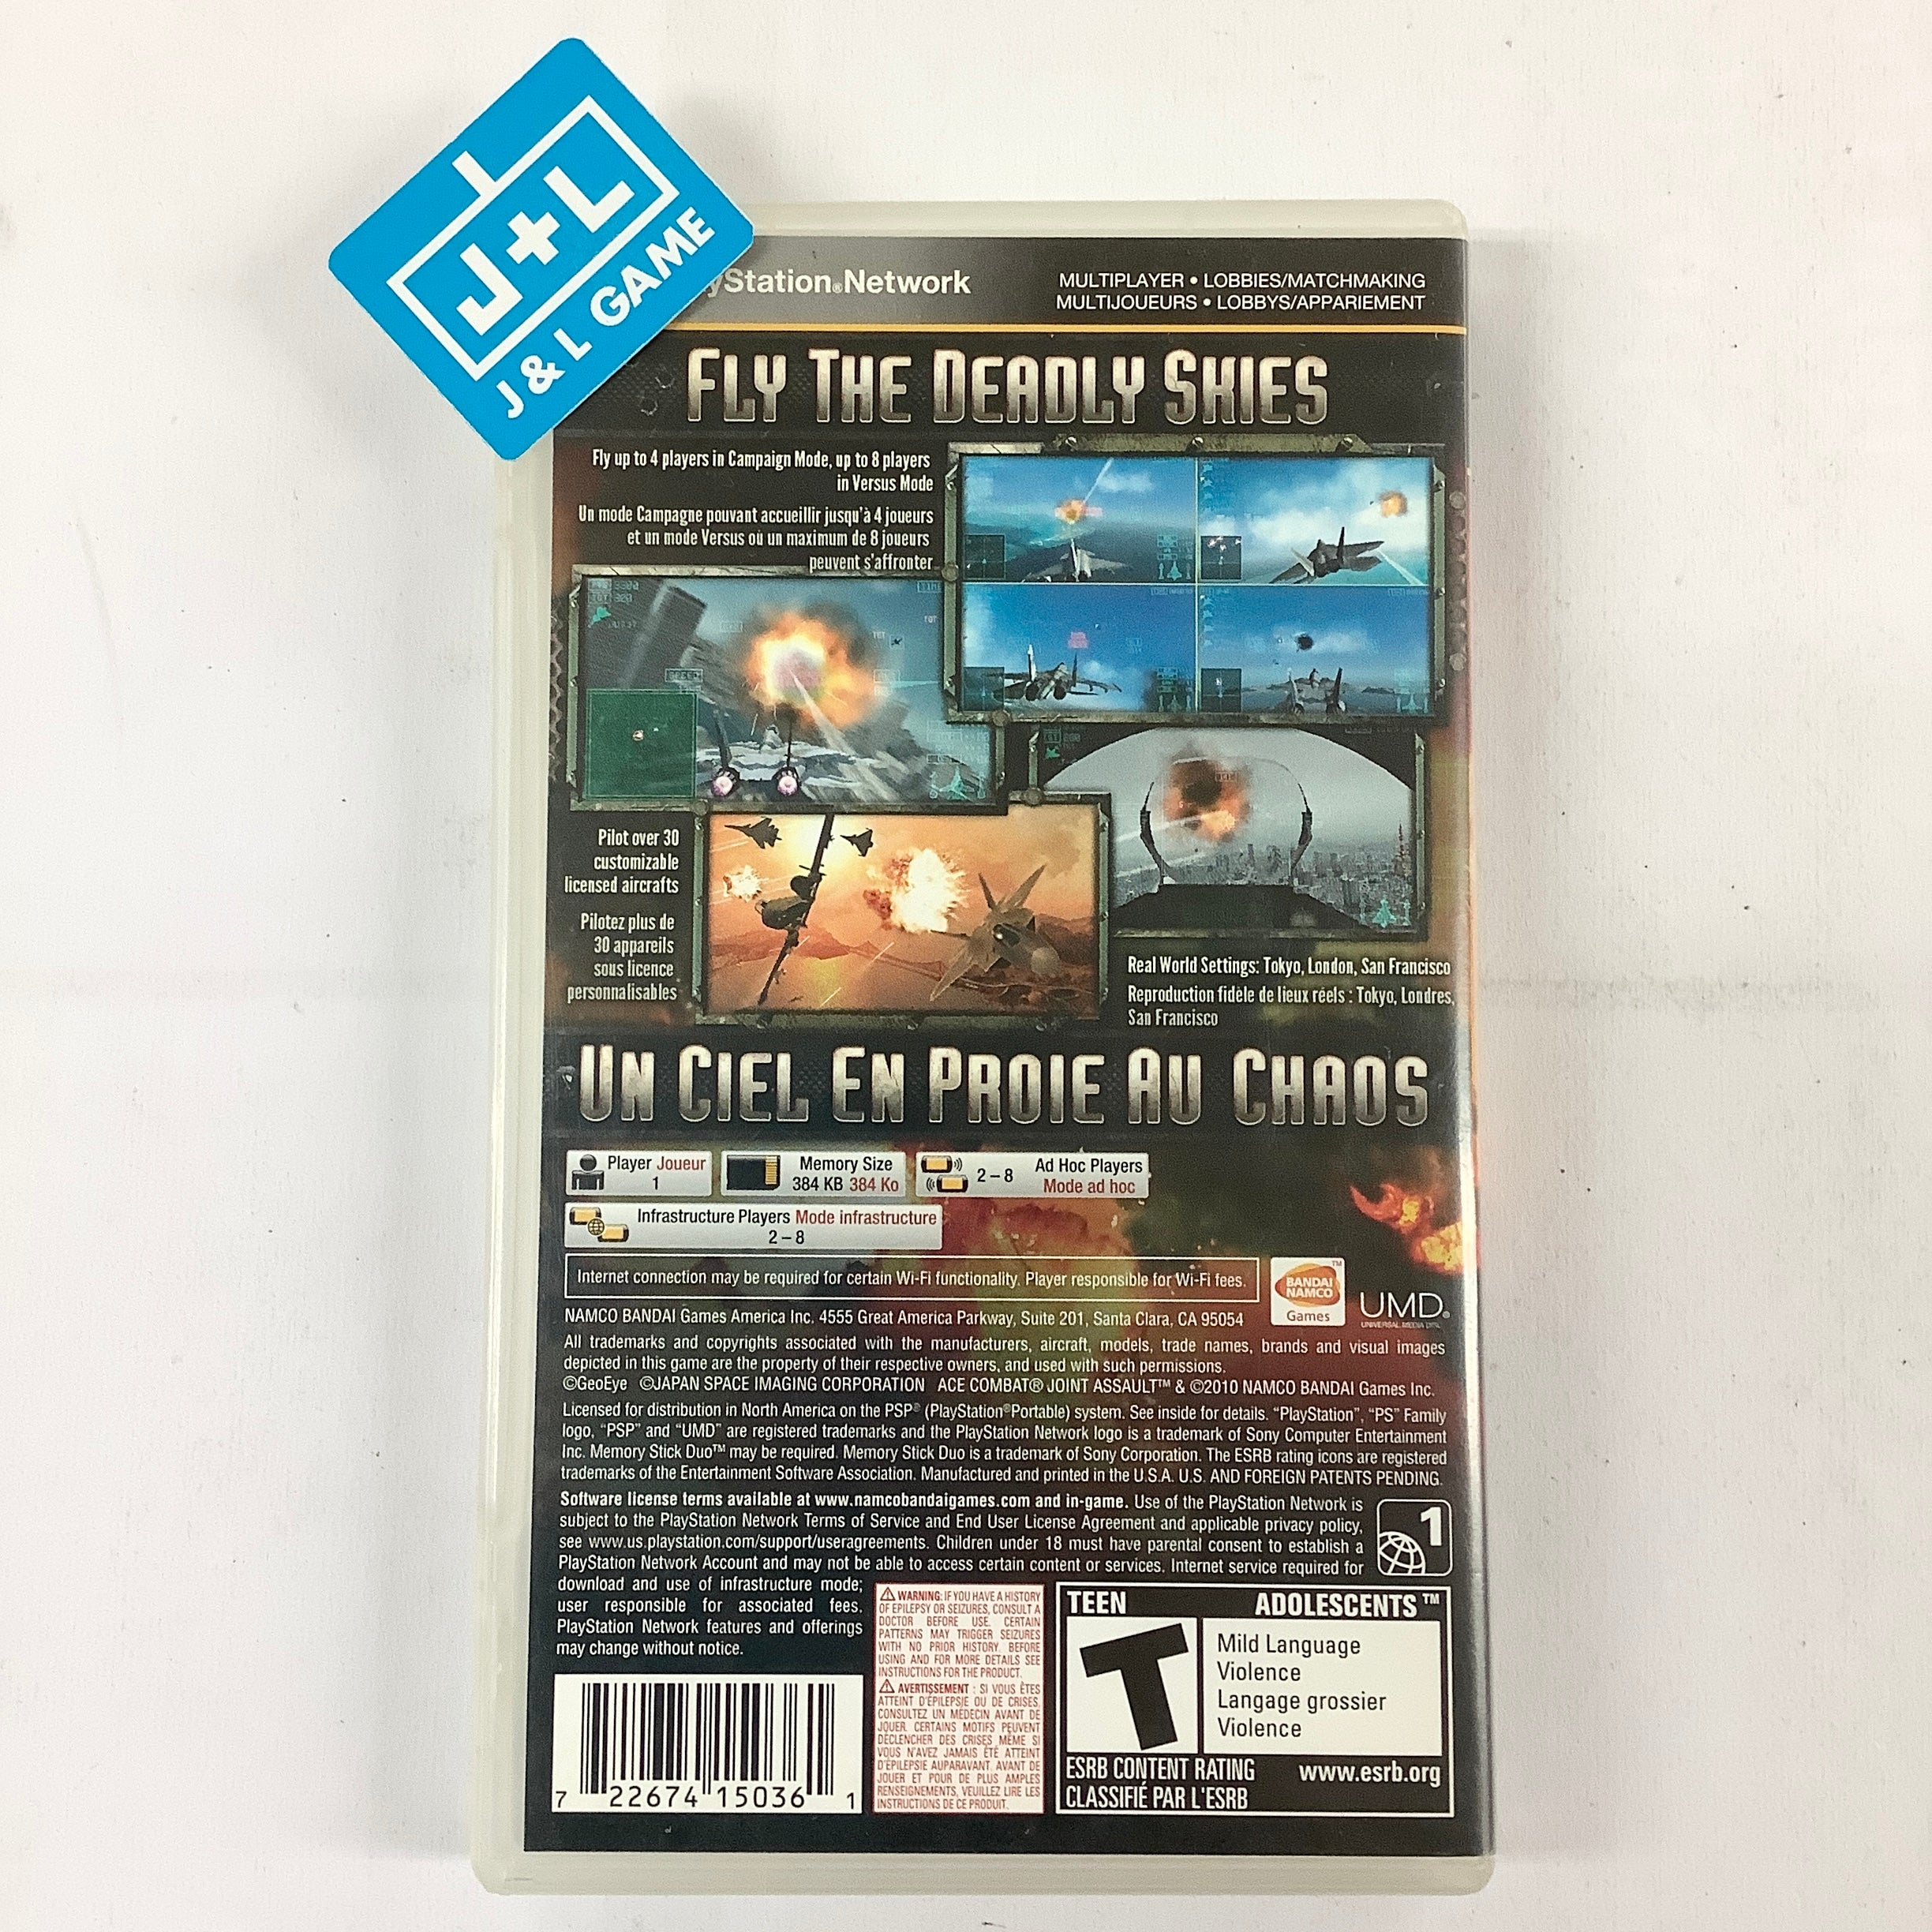 Ace Combat: Joint Assault - Sony PSP [Pre-Owned] Video Games Namco Bandai Games   